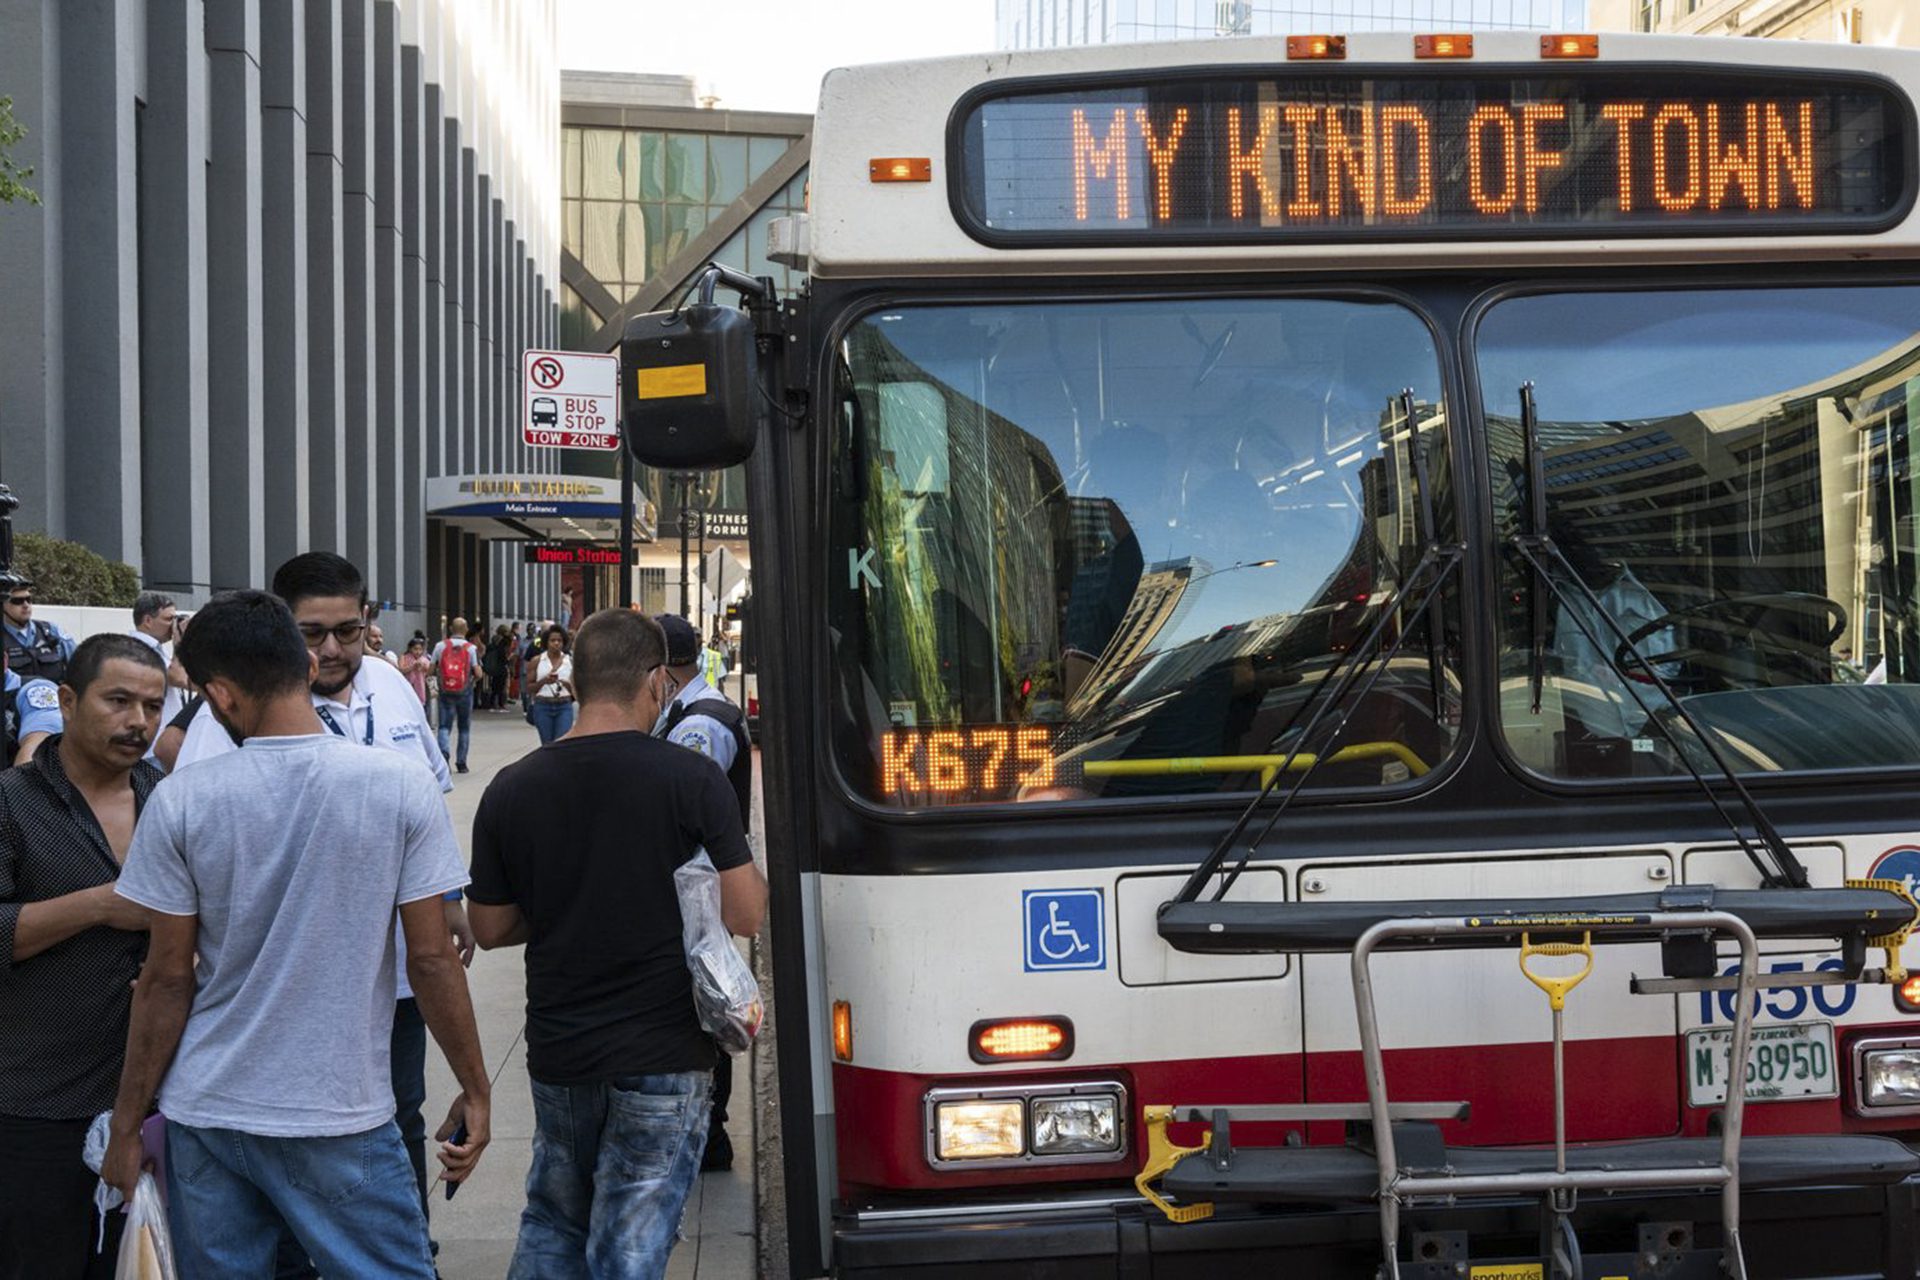 migrants by a Chicago bus that says "my kind of town"